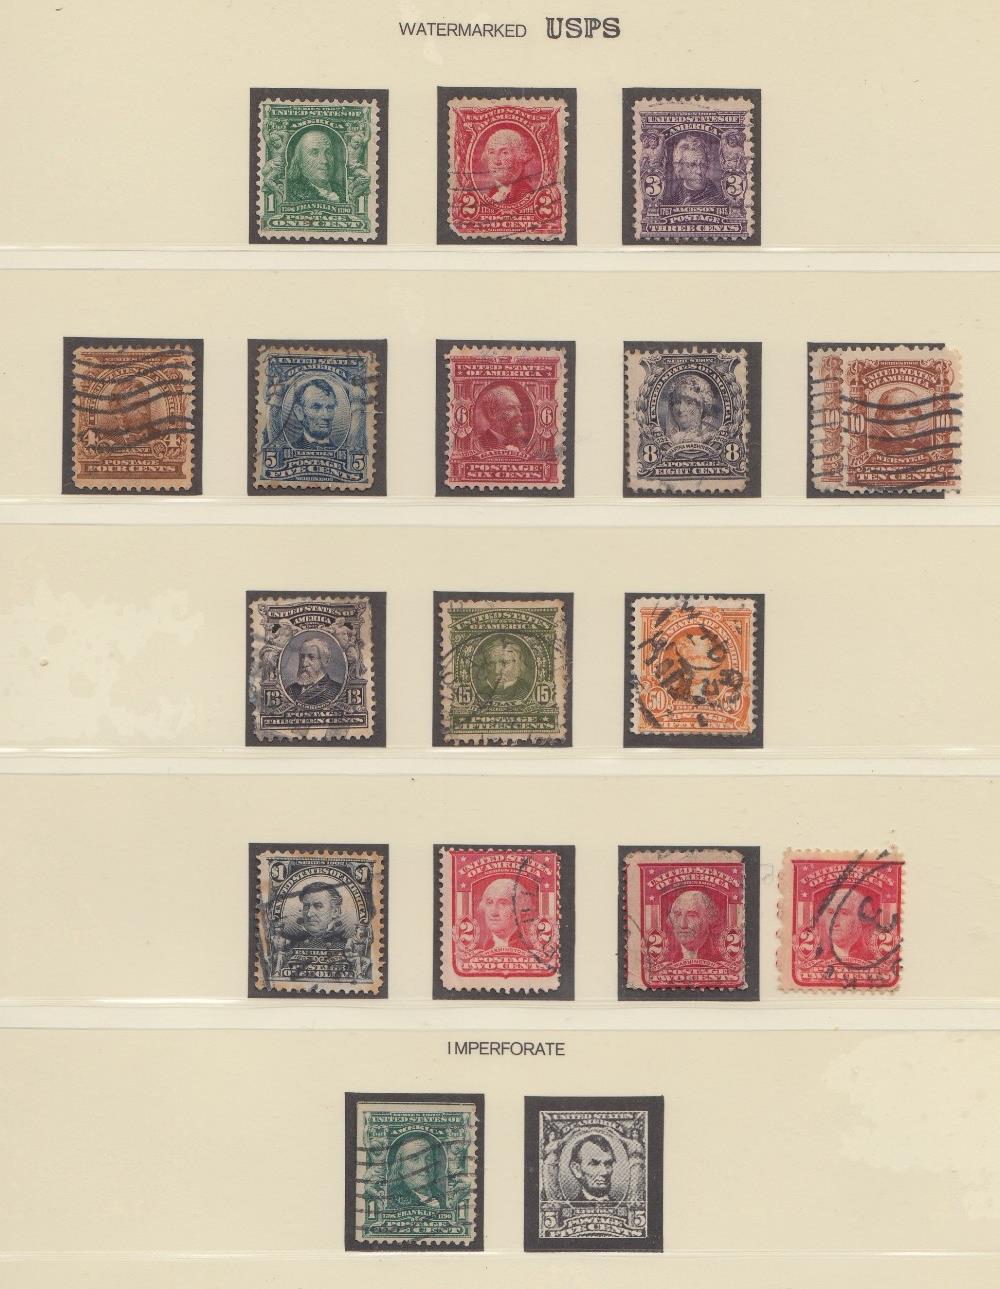 STAMPS USA Lindner hinge-less printed album with issues from 1847 to 1936, mostly used issues, - Image 6 of 8